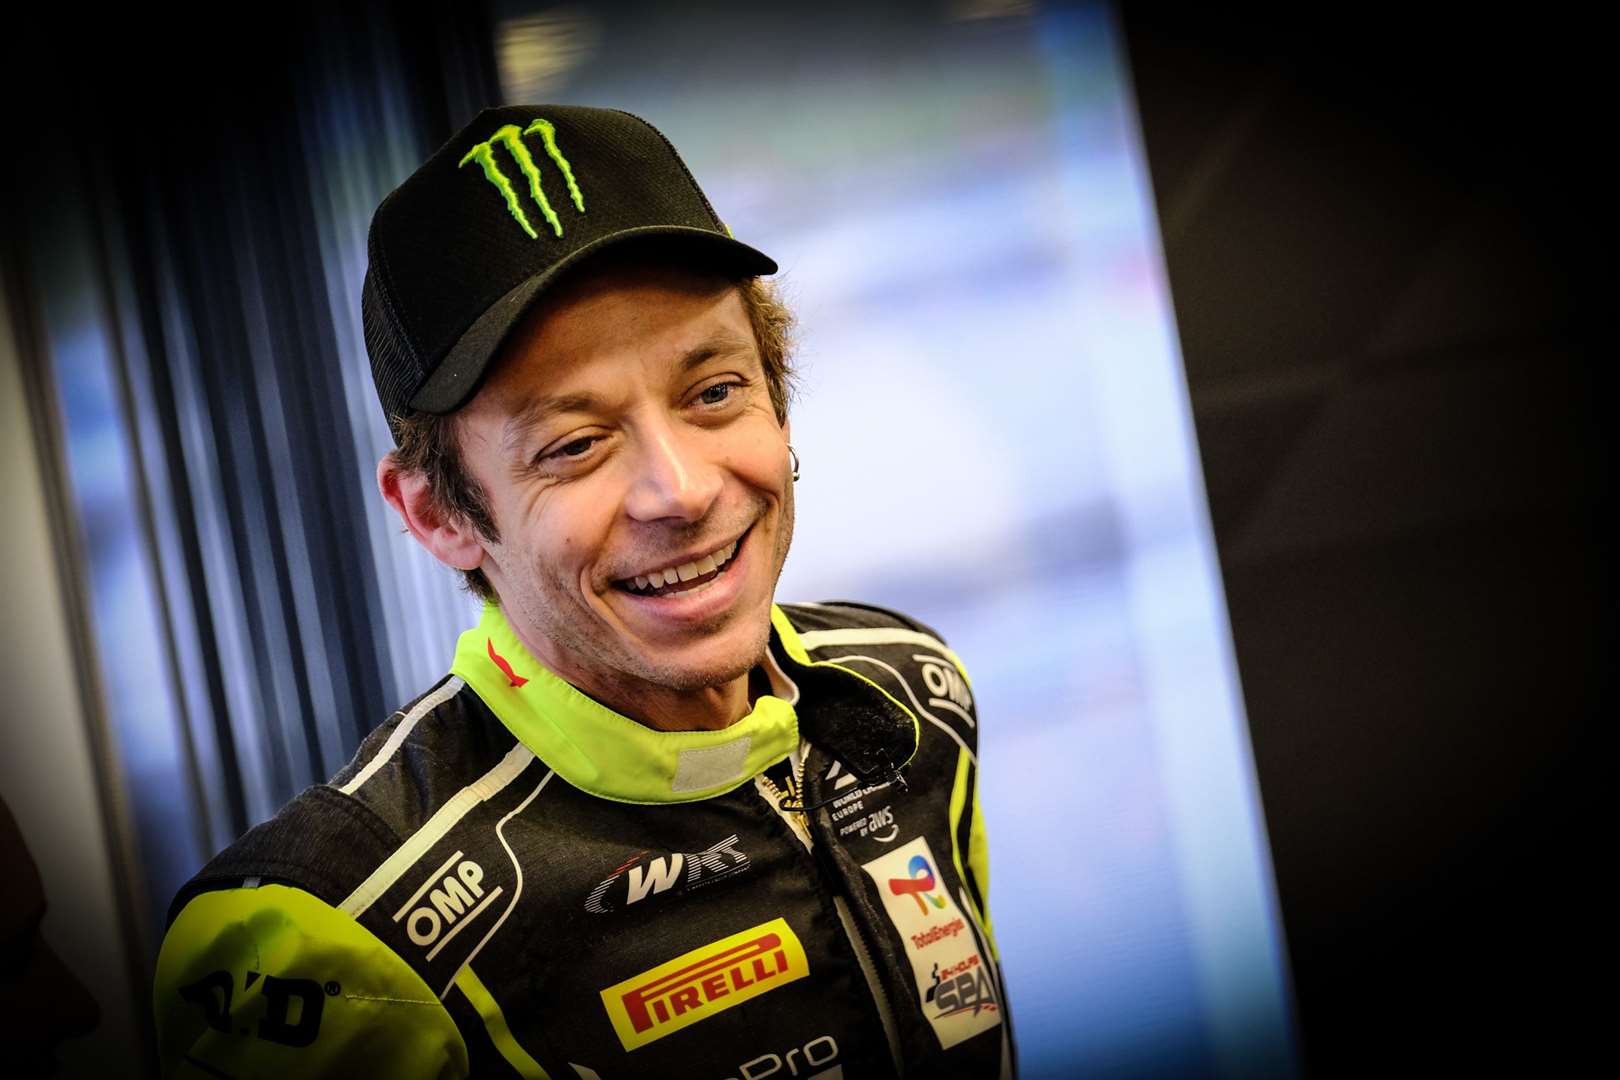 'The Doctor' - who retired from MotoGP last season - enjoyed his visit to Brands